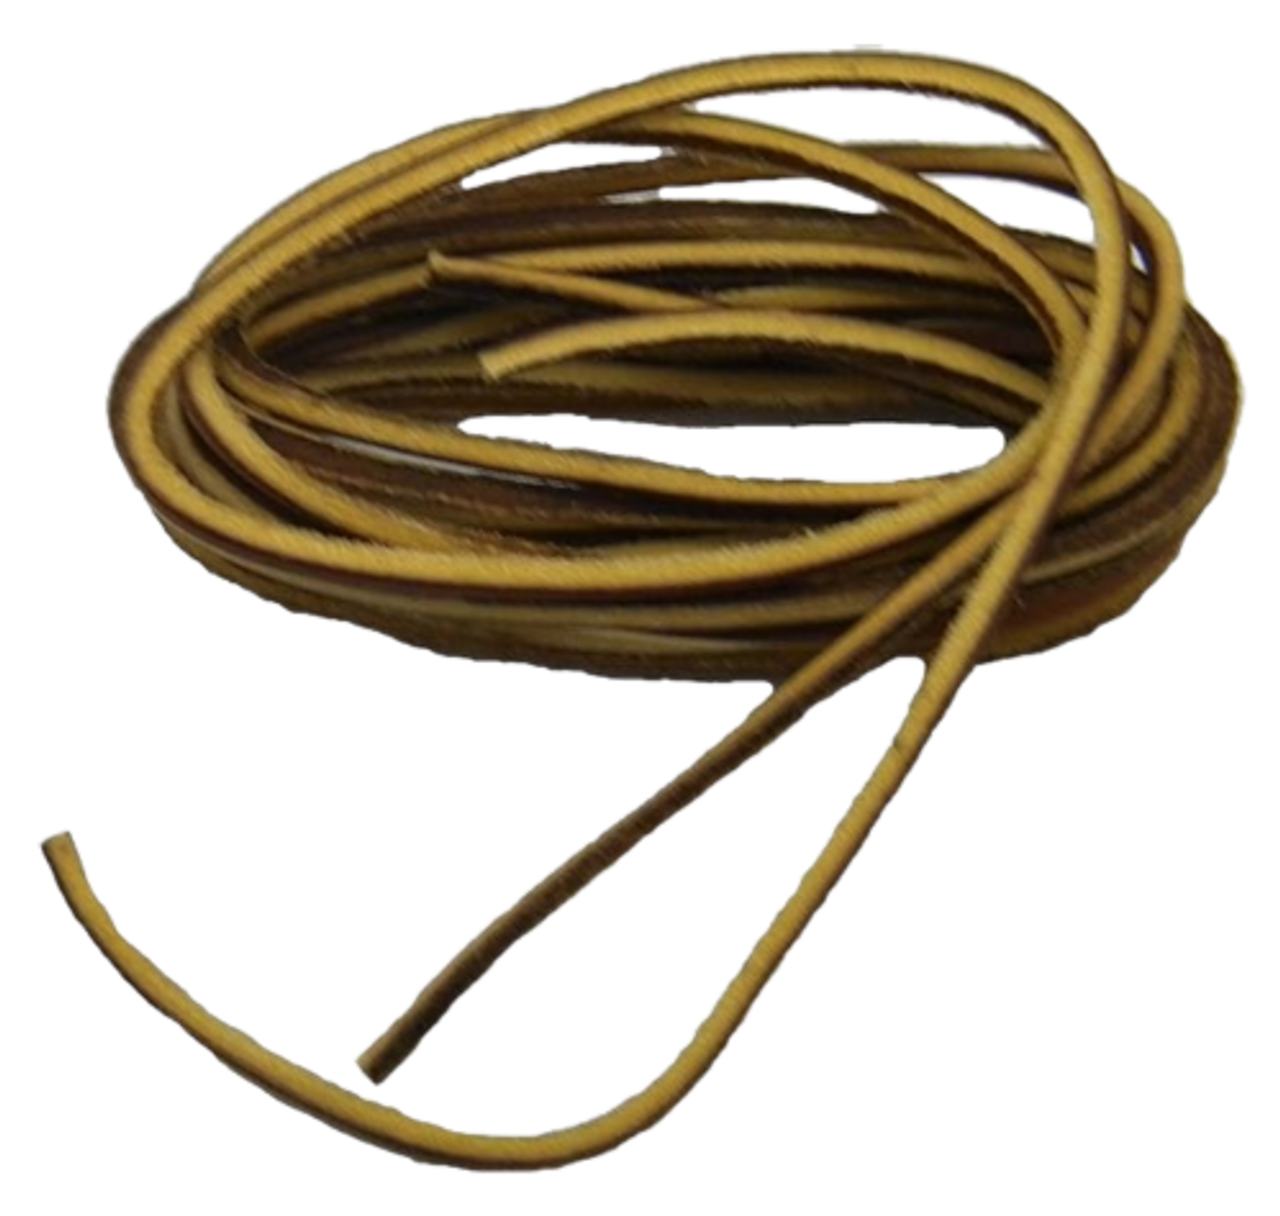 Cougar Brand Rawhide Laces in Tan